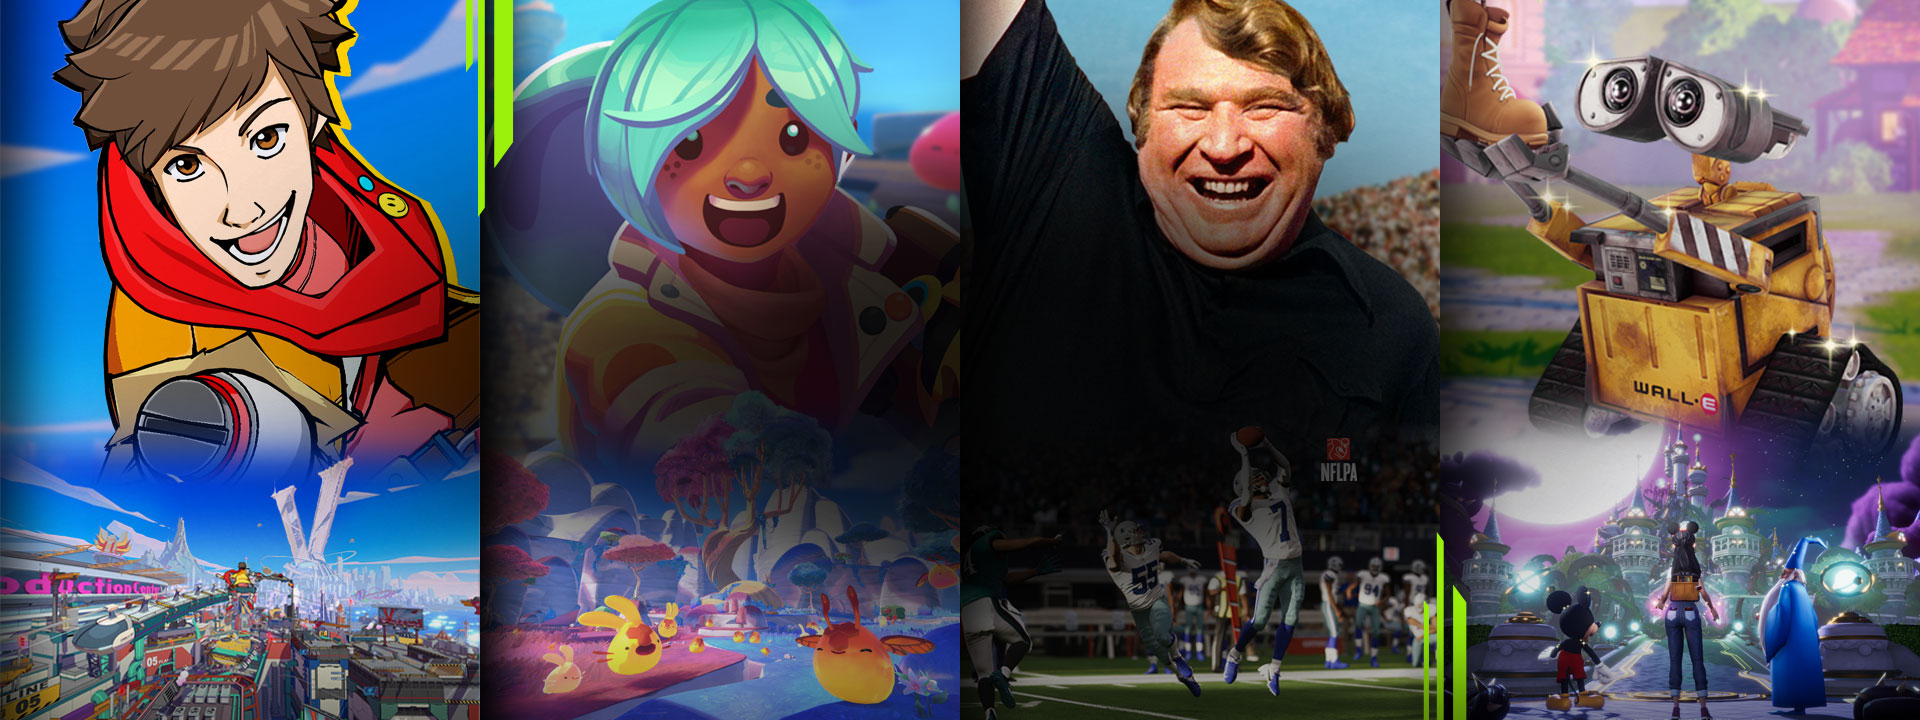 A selection of games available with Xbox Game Pass including Hi-Fi RUSH, Slime Rancher 2, Madden NFL 23 and Disney Dreamlight Valley.